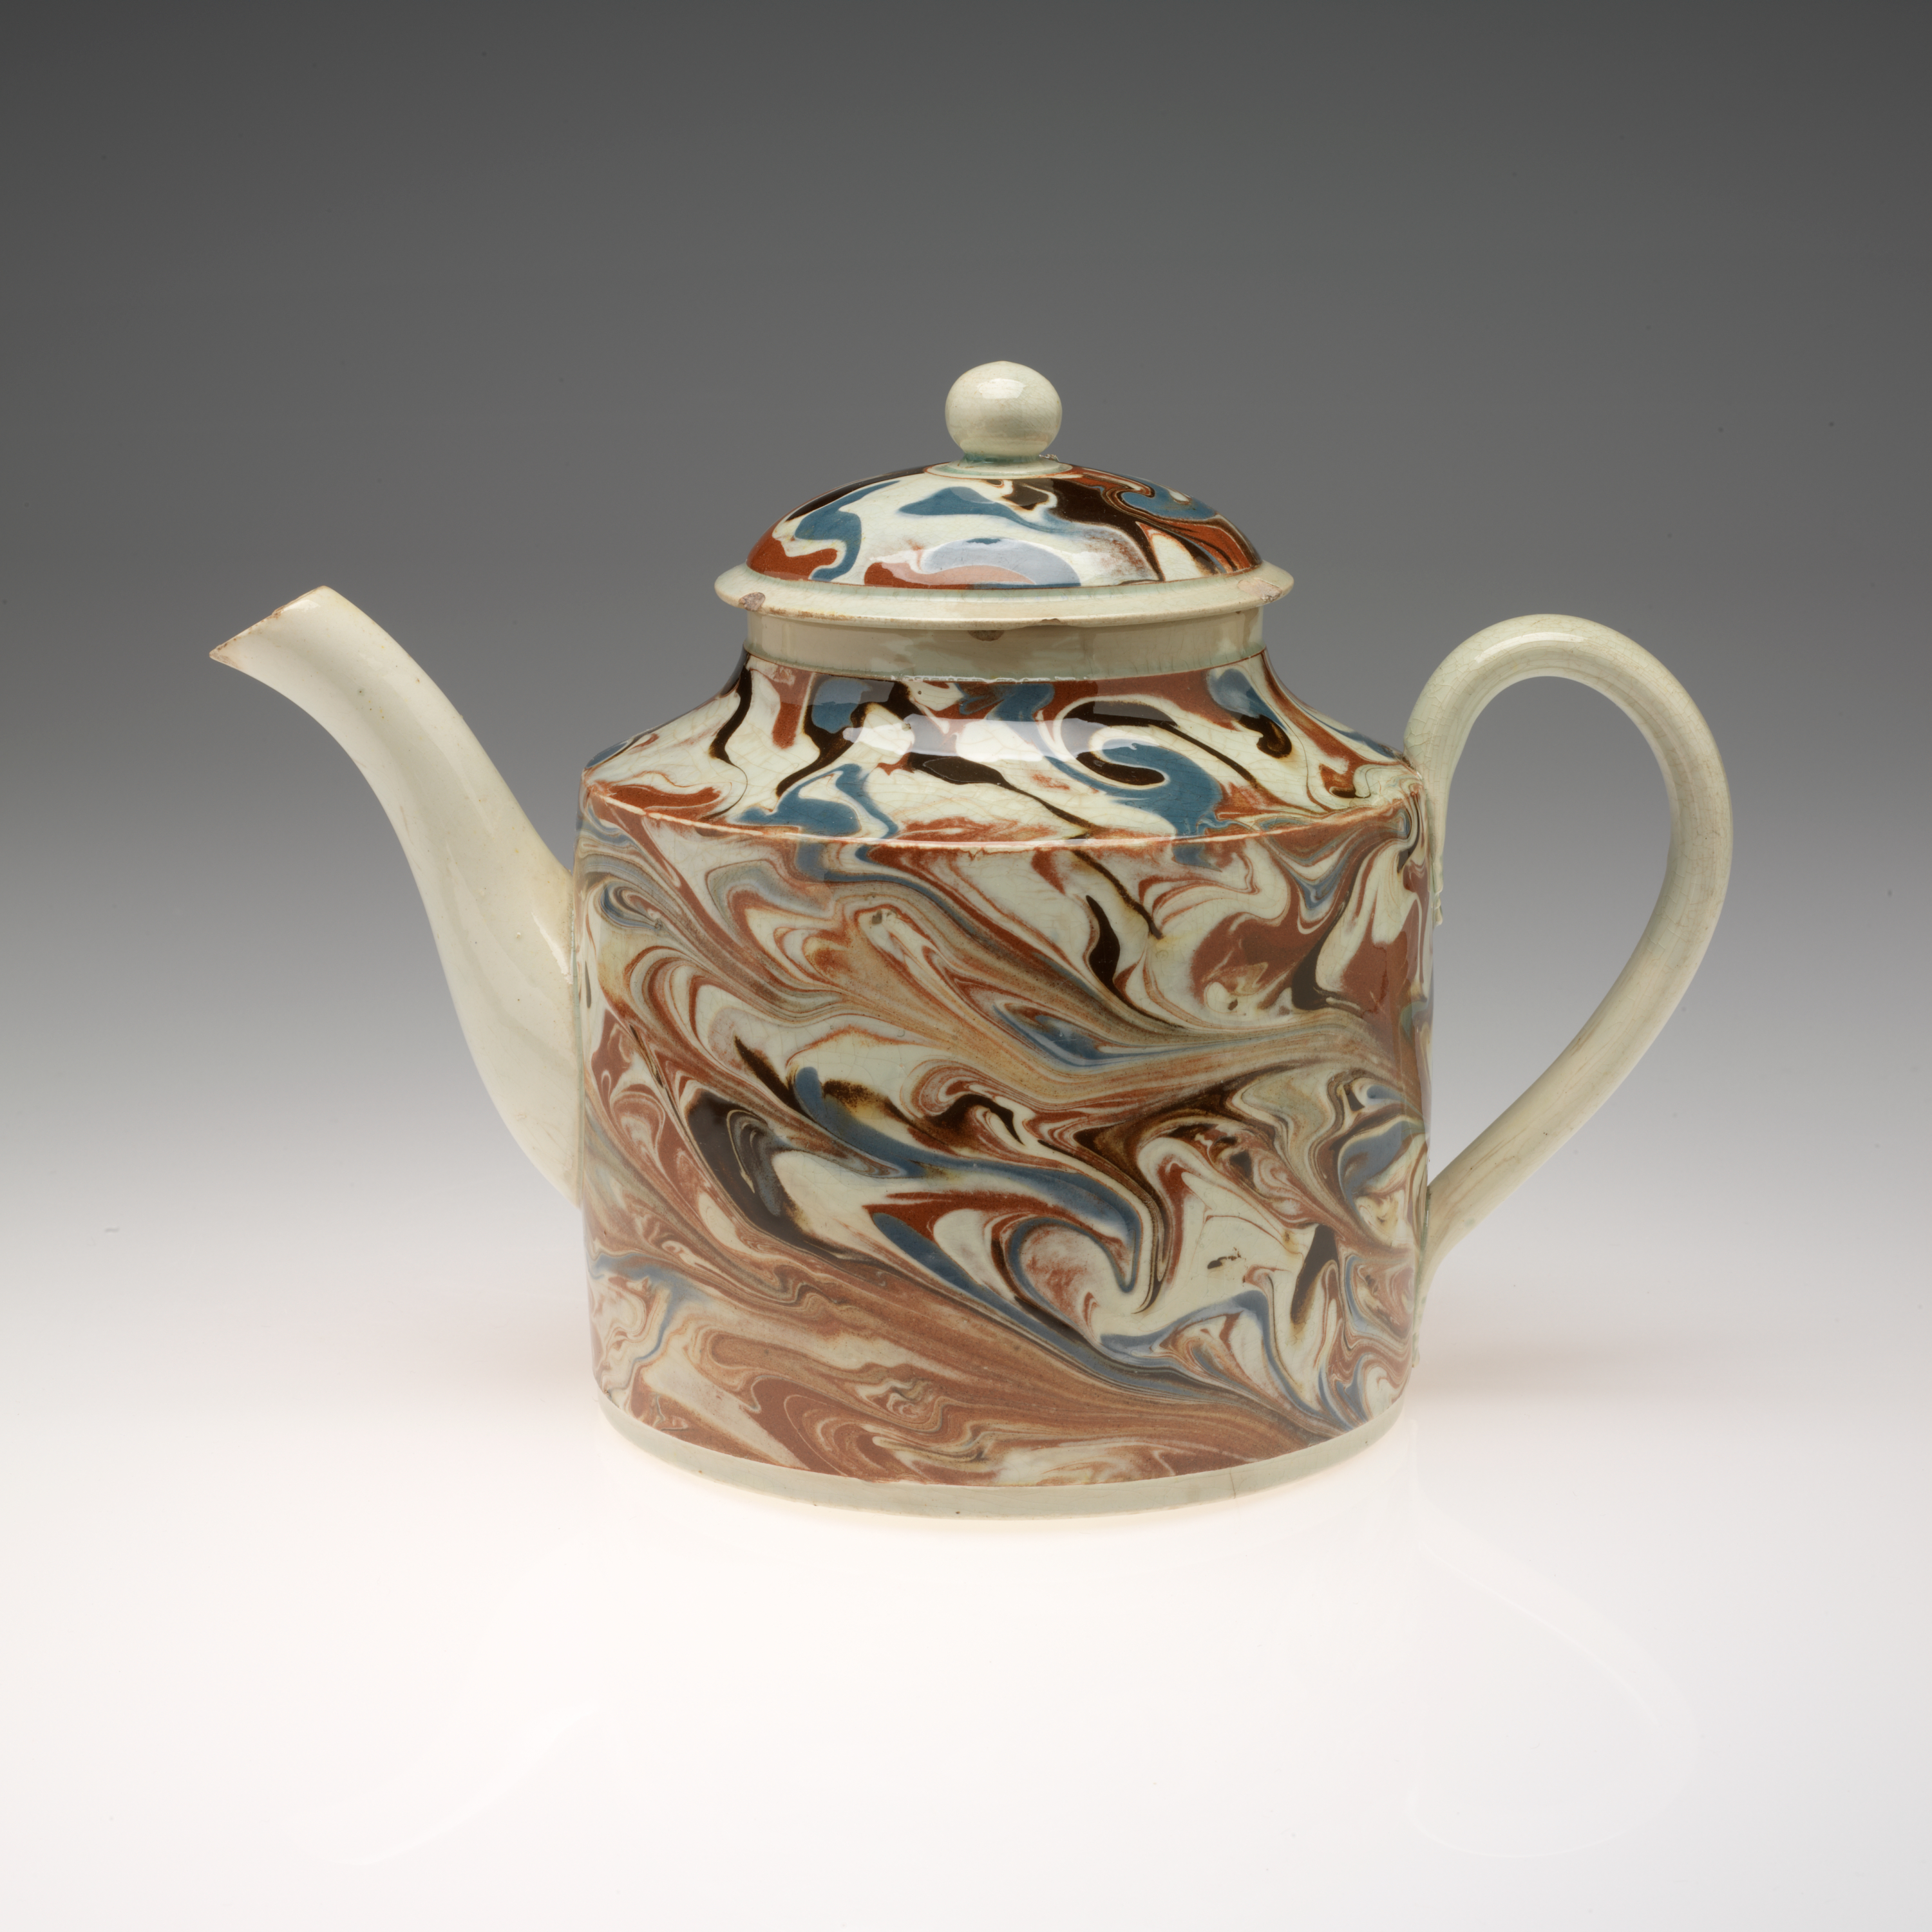 /Teapot%20with%20a%20swirling%2C%20marbled%20design%20on%20the%20body%20and%20lid%20in%20brown%2C%20blue%2C%20black%2C%20and%20cream.%20Spout%2C%20handle%2C%20and%20rounded%20finial%20are%20solid%20cream%20colored.%20